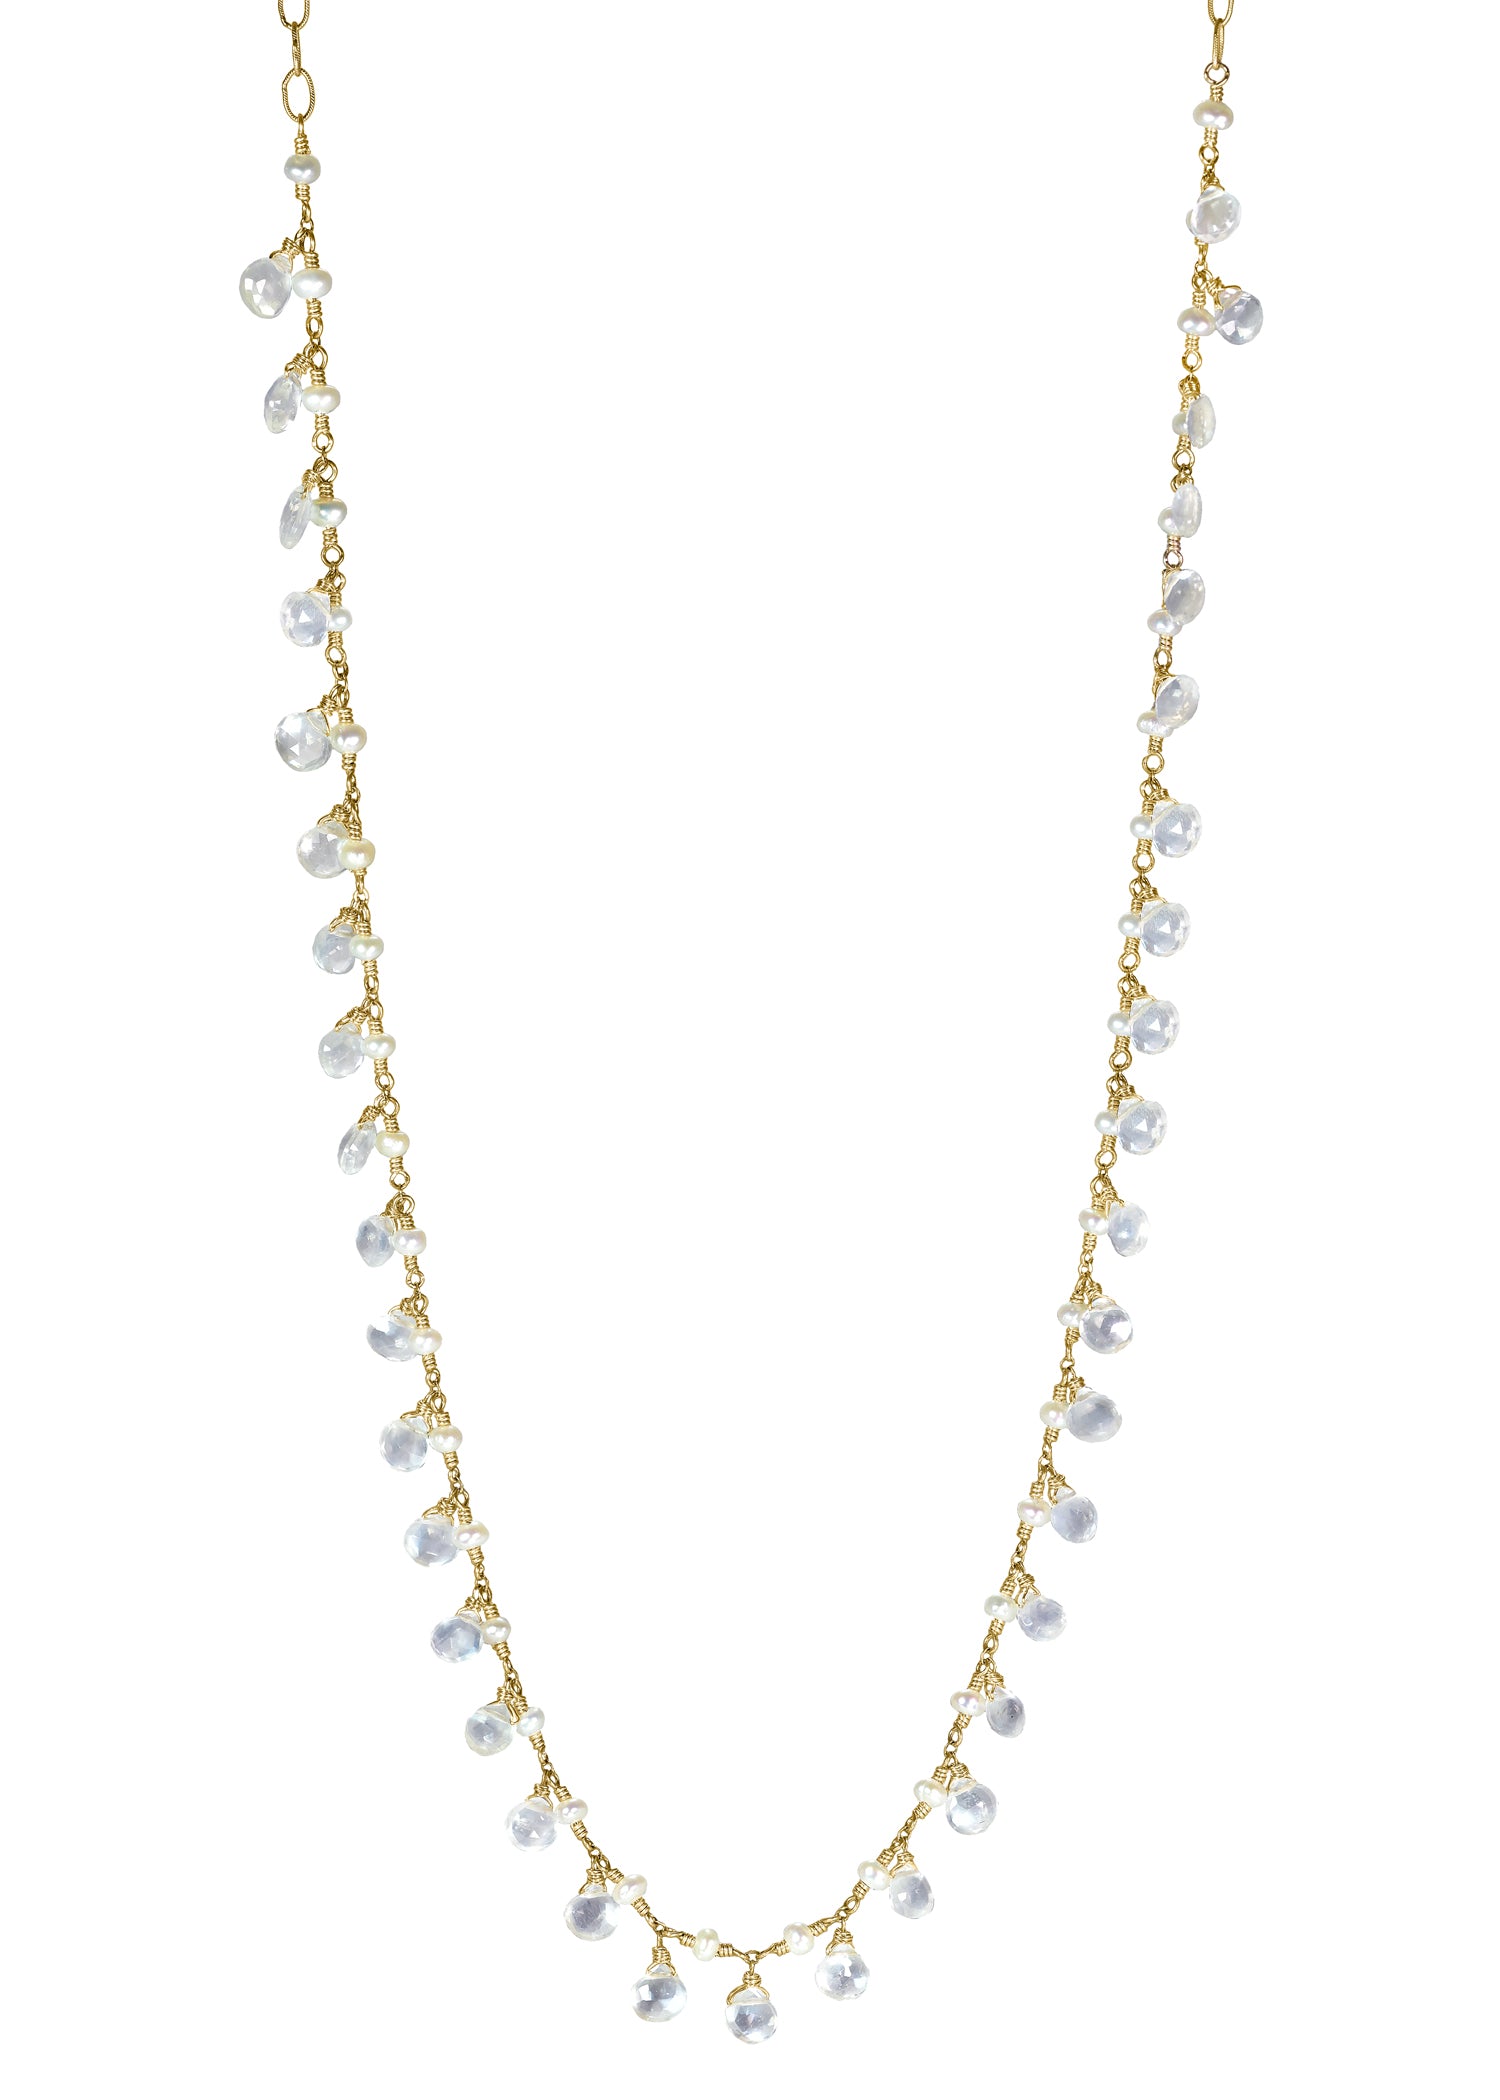 White moonstone Freshwater pearl 14k gold fill Necklace measures 18-1/4" in length (including a 3" extender) Moonstone drops measure 3/16" Handmade in our Los Angeles studio